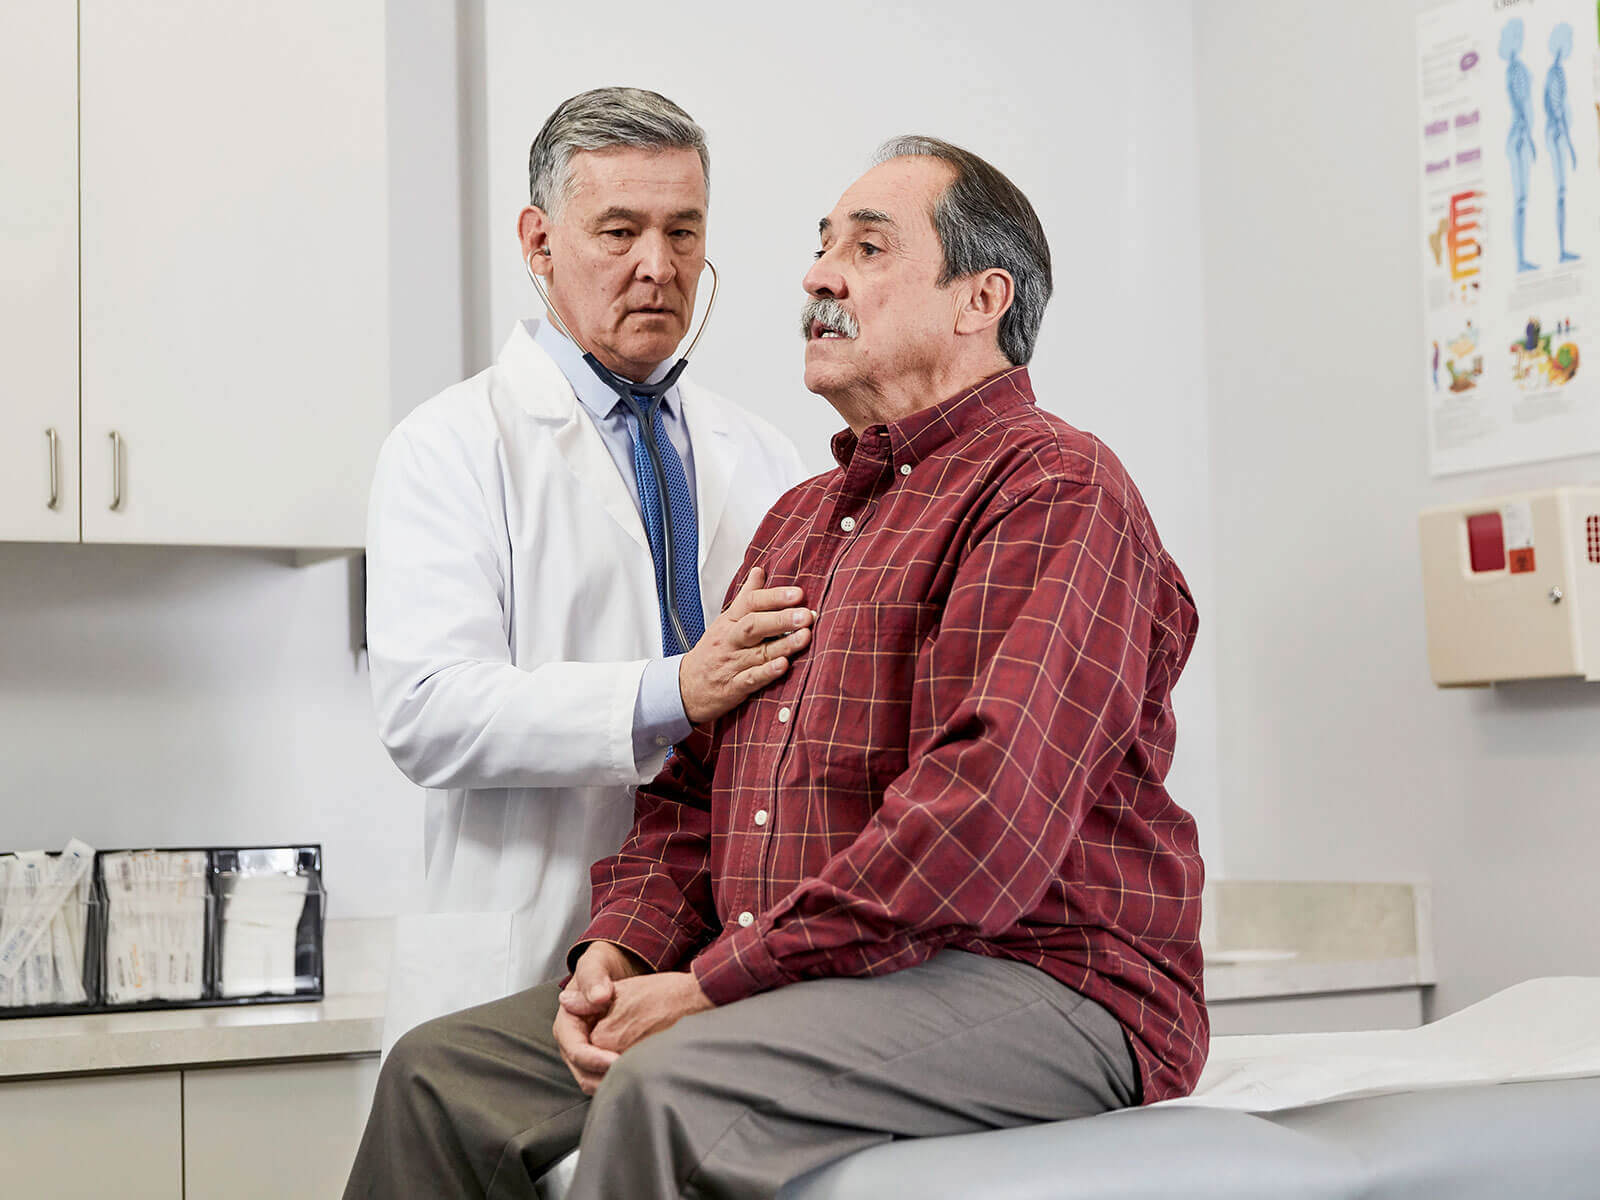 A doctor checks a man’s heartbeat with a stethoscope in an examination room.